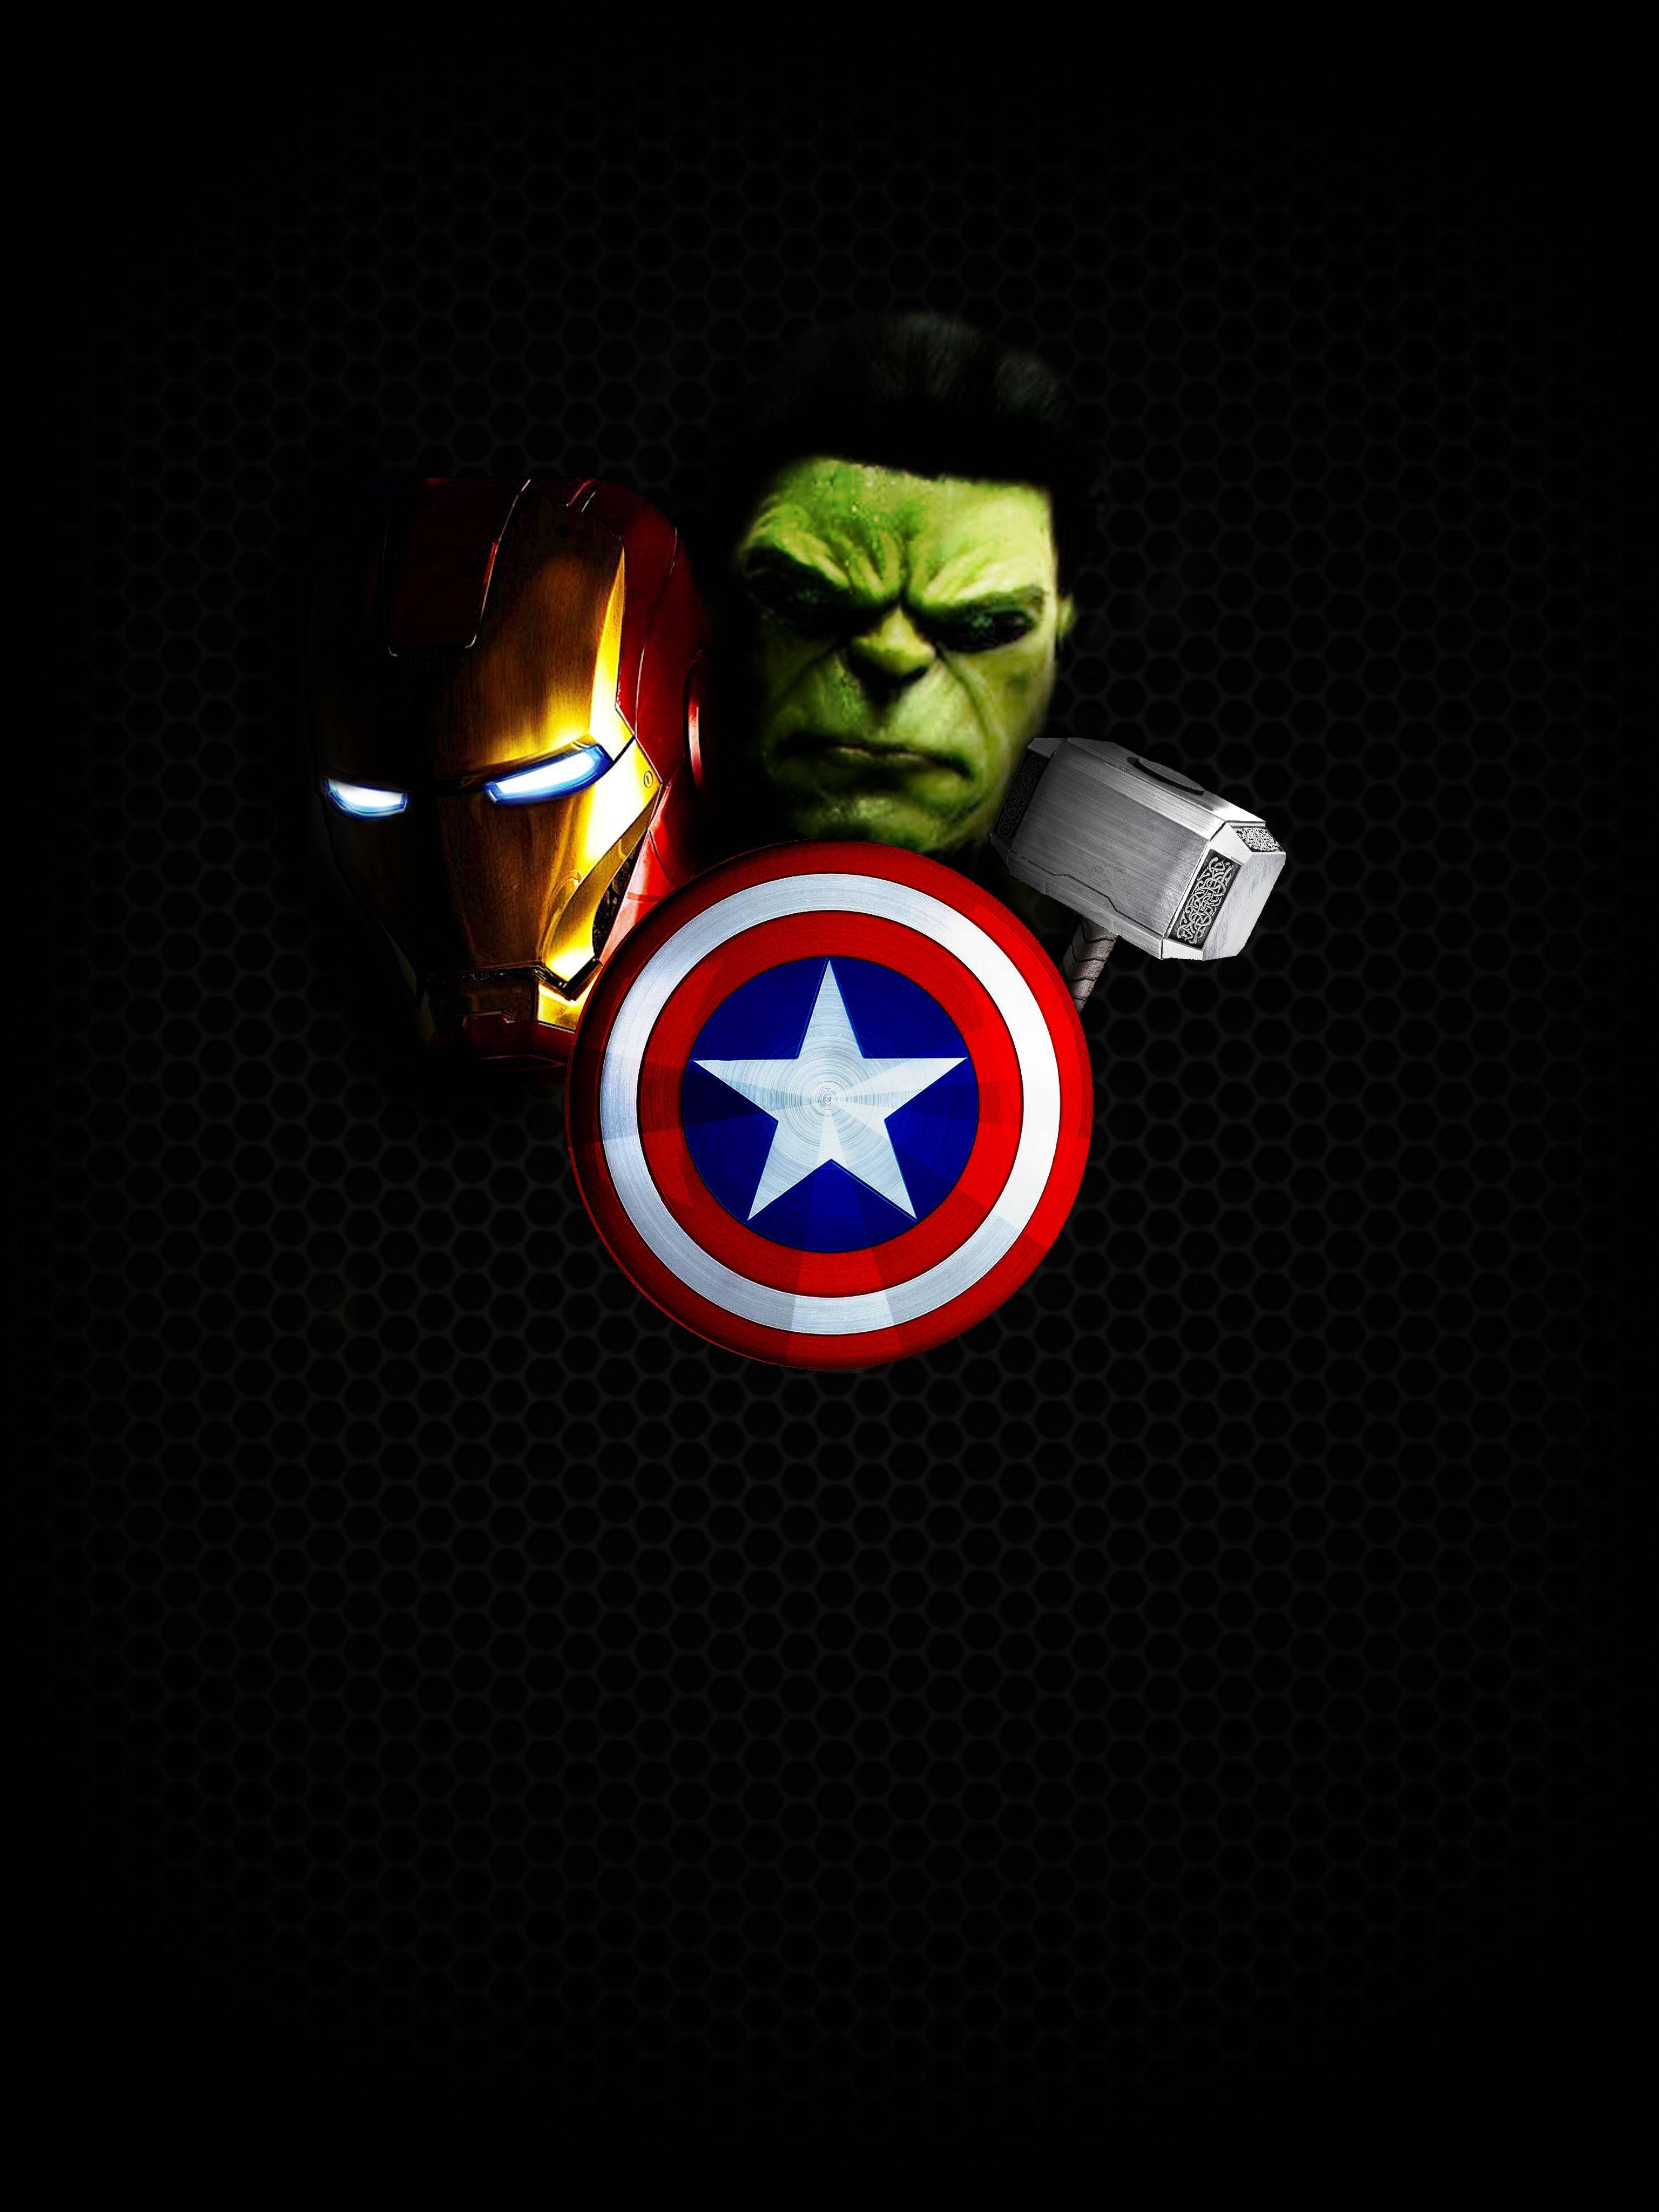 Old Hulk and Hawkeye Marvels Avengers Wallpapers